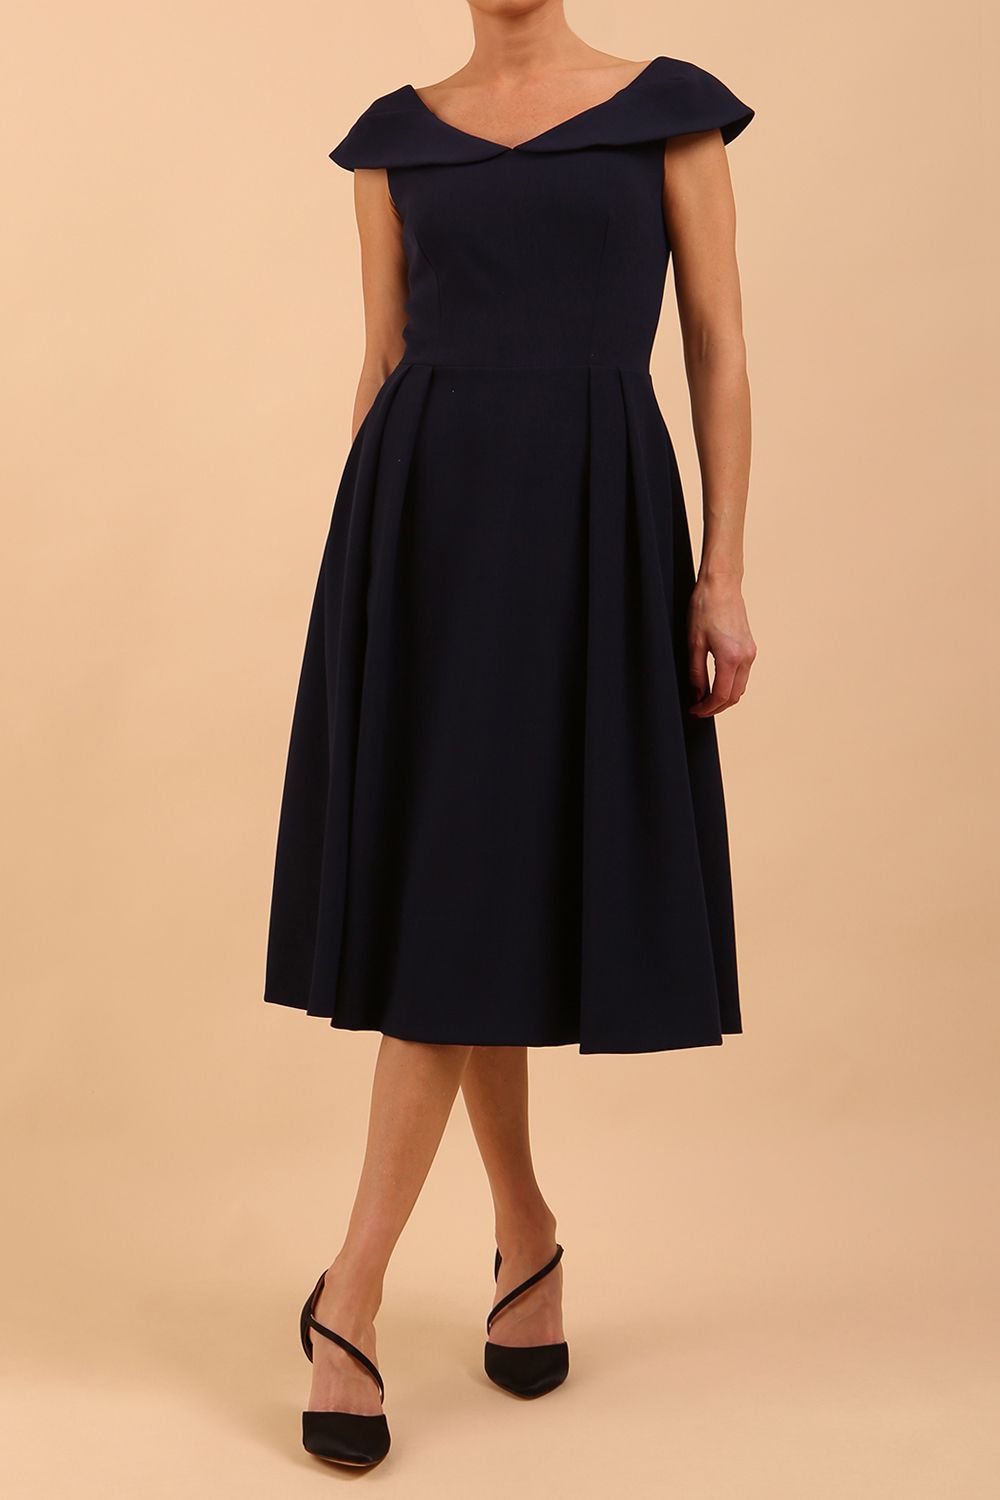 Model wearing the Diva Chesterton Sleeveless dress with oversized collar detail and swing pleated skirt in navy blue front image